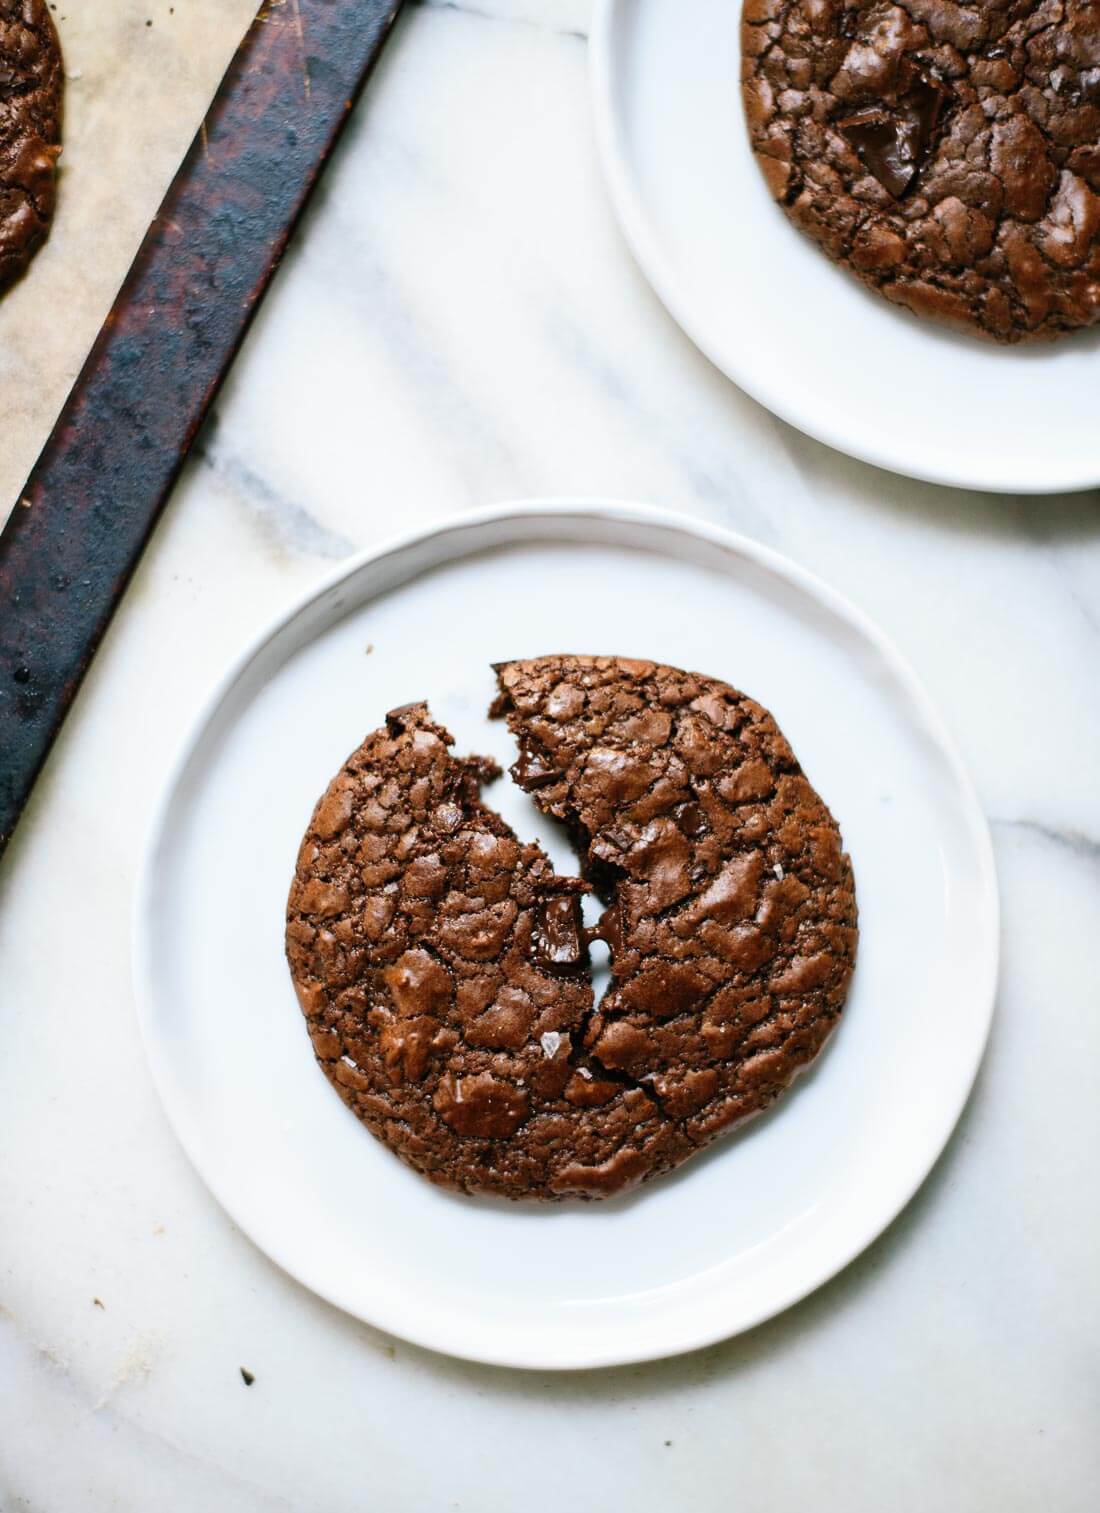 This gluten-free double chocolate cookie recipe is made with buckwheat flour! These amazing cookies taste like brownies. Recipe from the new Alternative Baker cookbook. cookieandkate.com